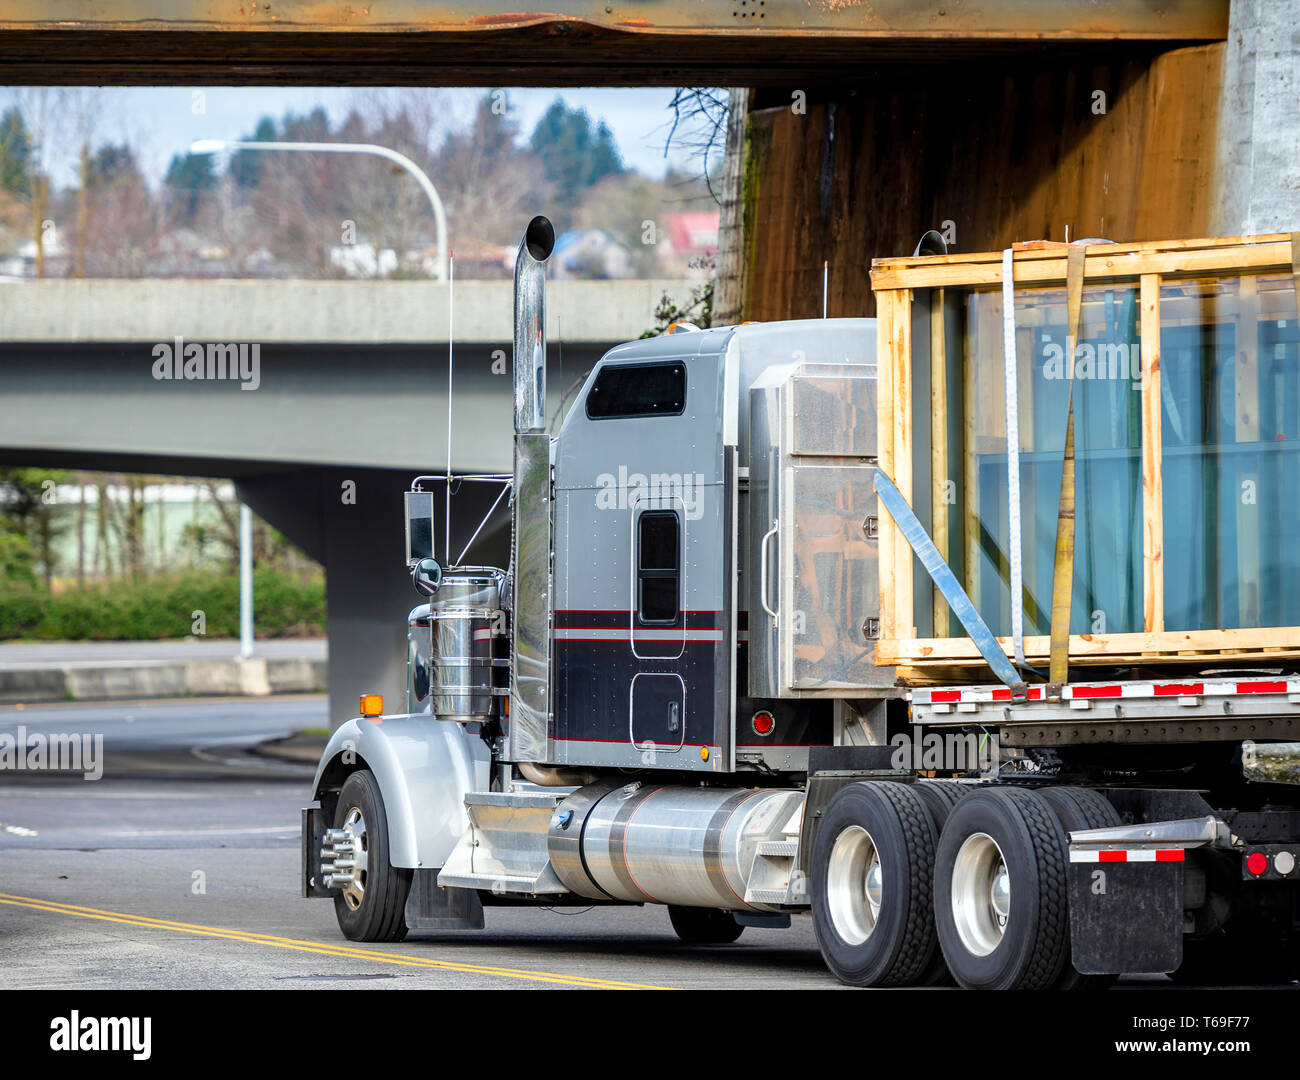 Big rig gray and black classic long haul semi truck transporting windows glass sheets in wood boxes fastened on flat bed semi trailer turning under lo Stock Photo